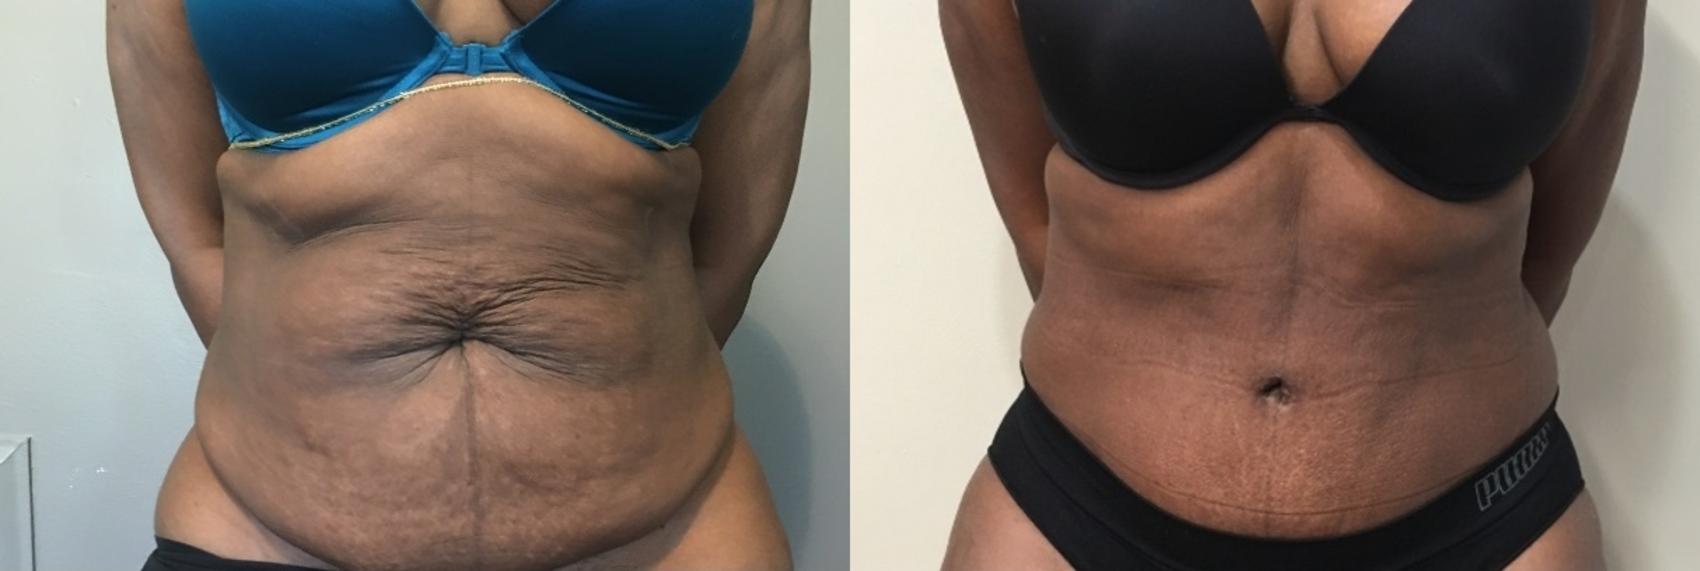 https://images.mississaugacosmeticsurgeryclinic.com/content/images/tummy-tuck-134-front-detail.jpg